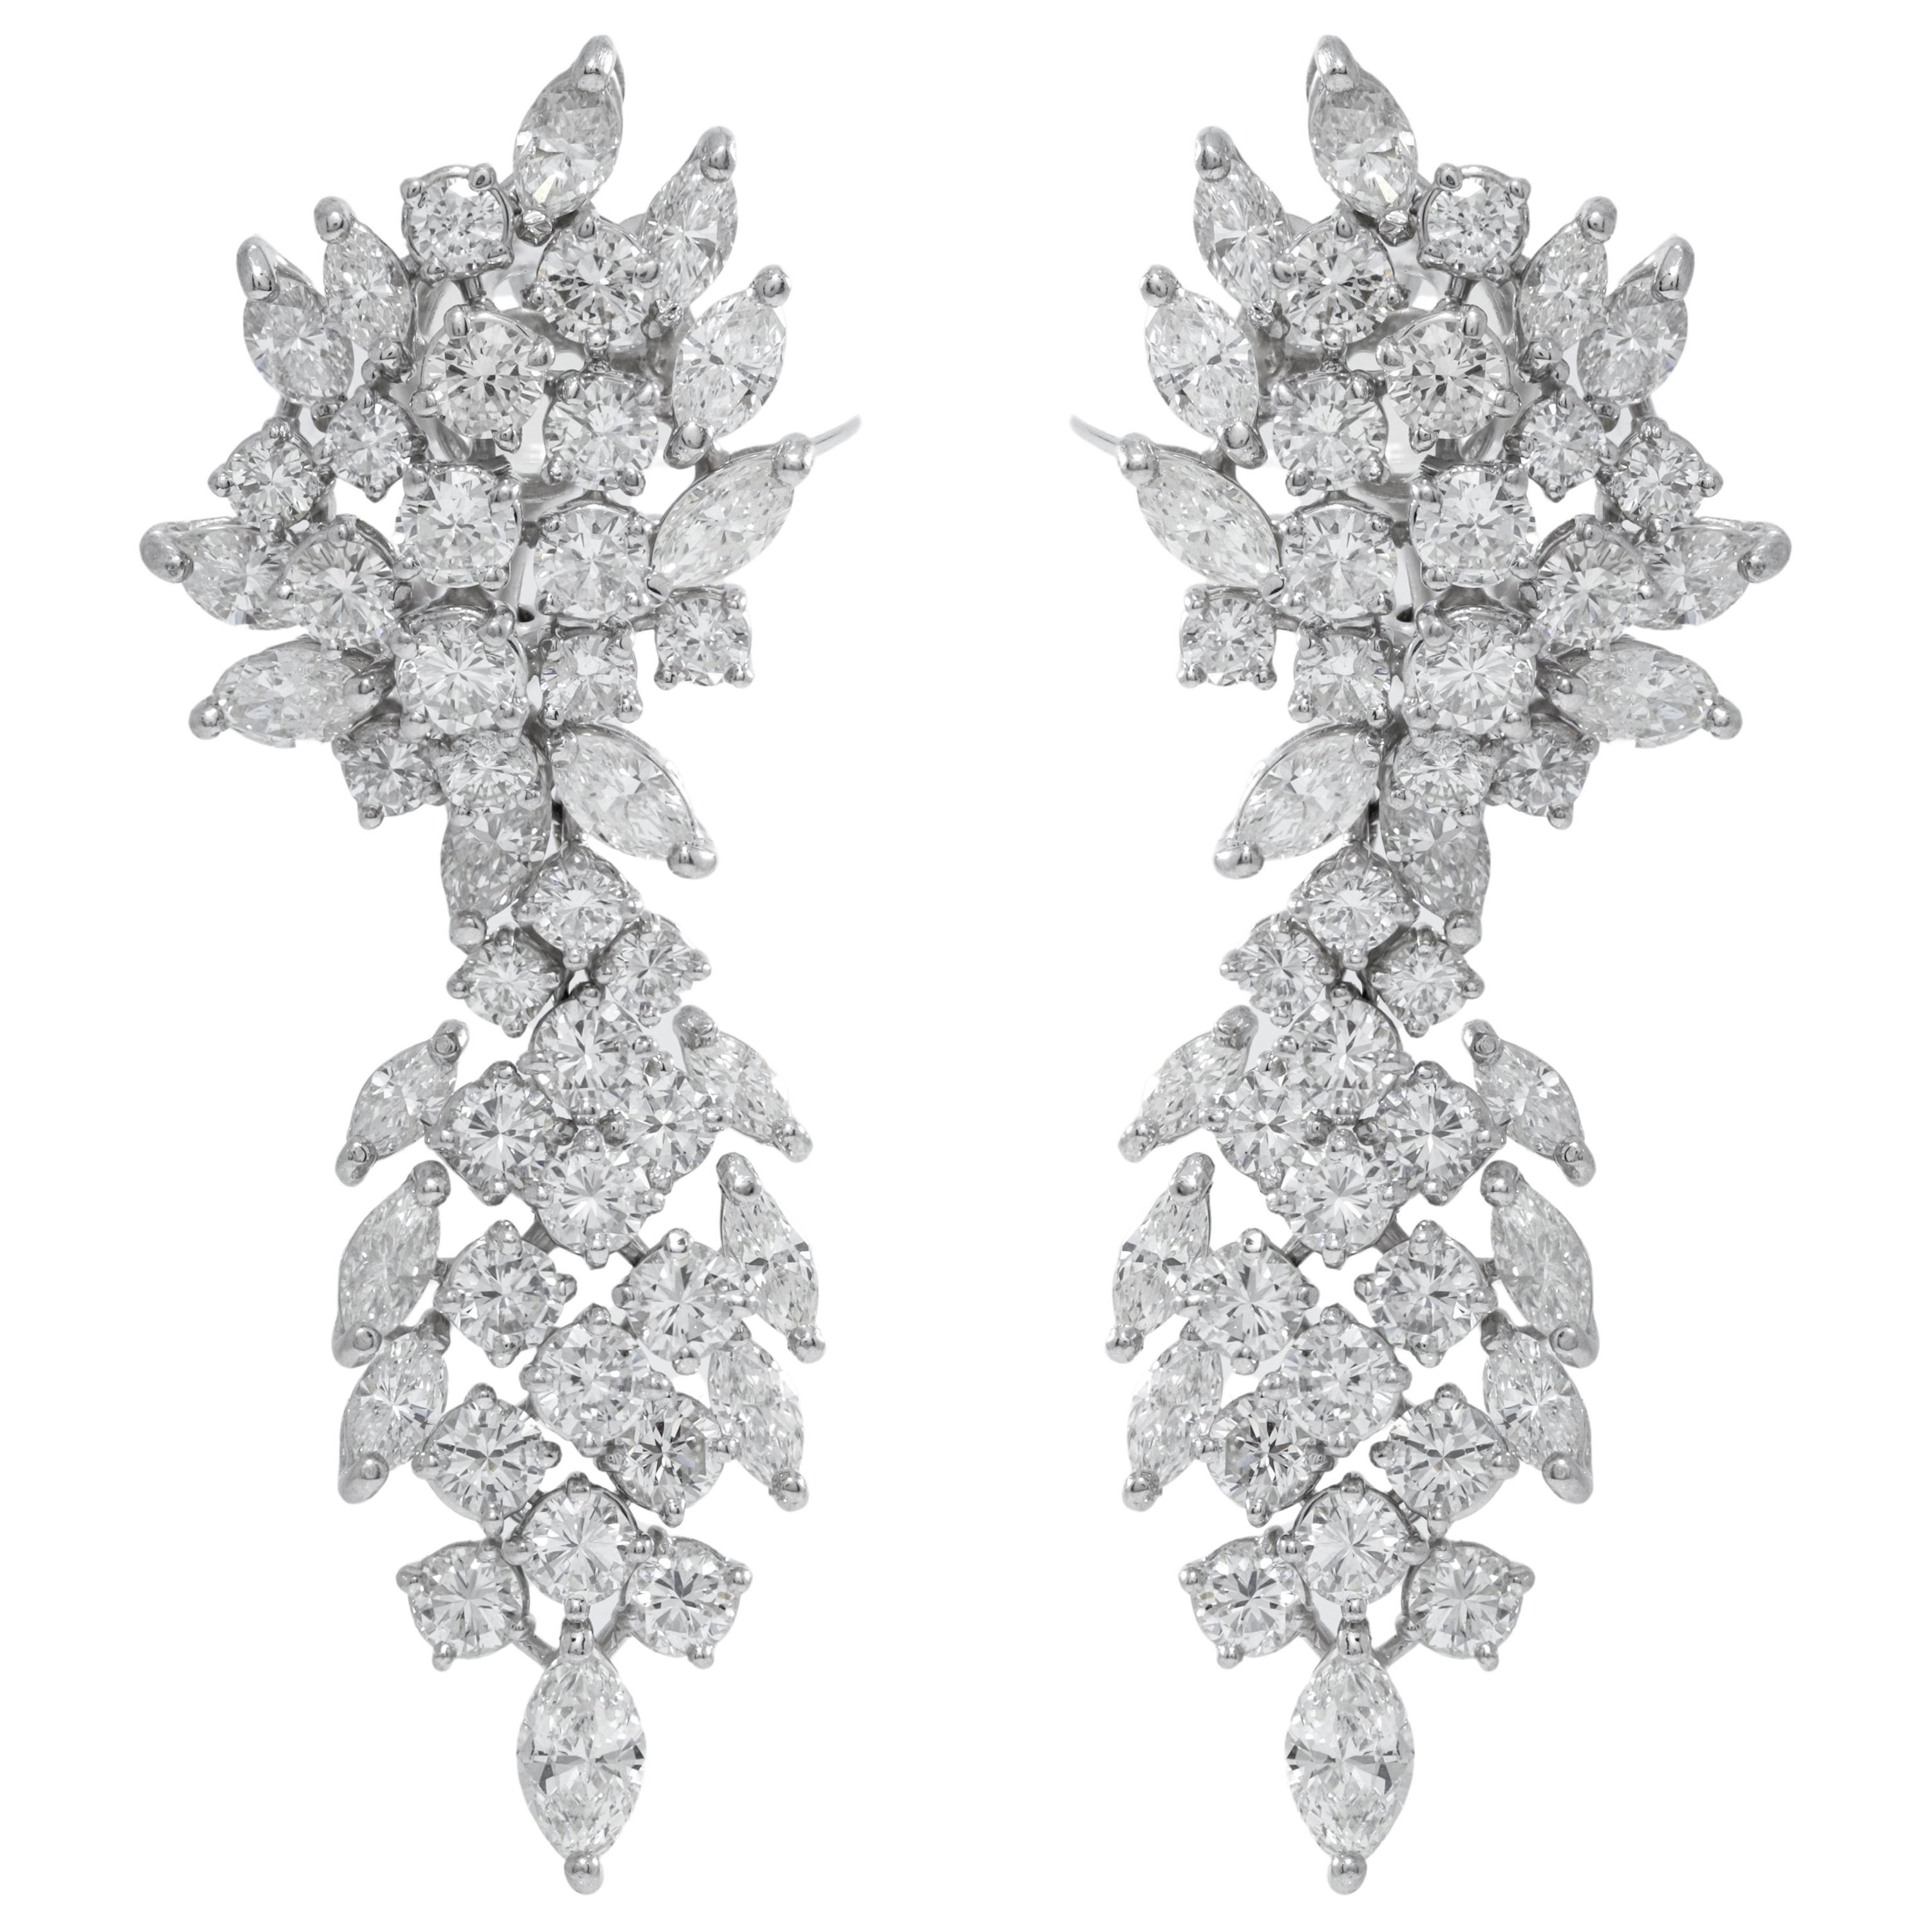 13.00 Carat Diamond Earrings with Deattachable Platinum For Sale